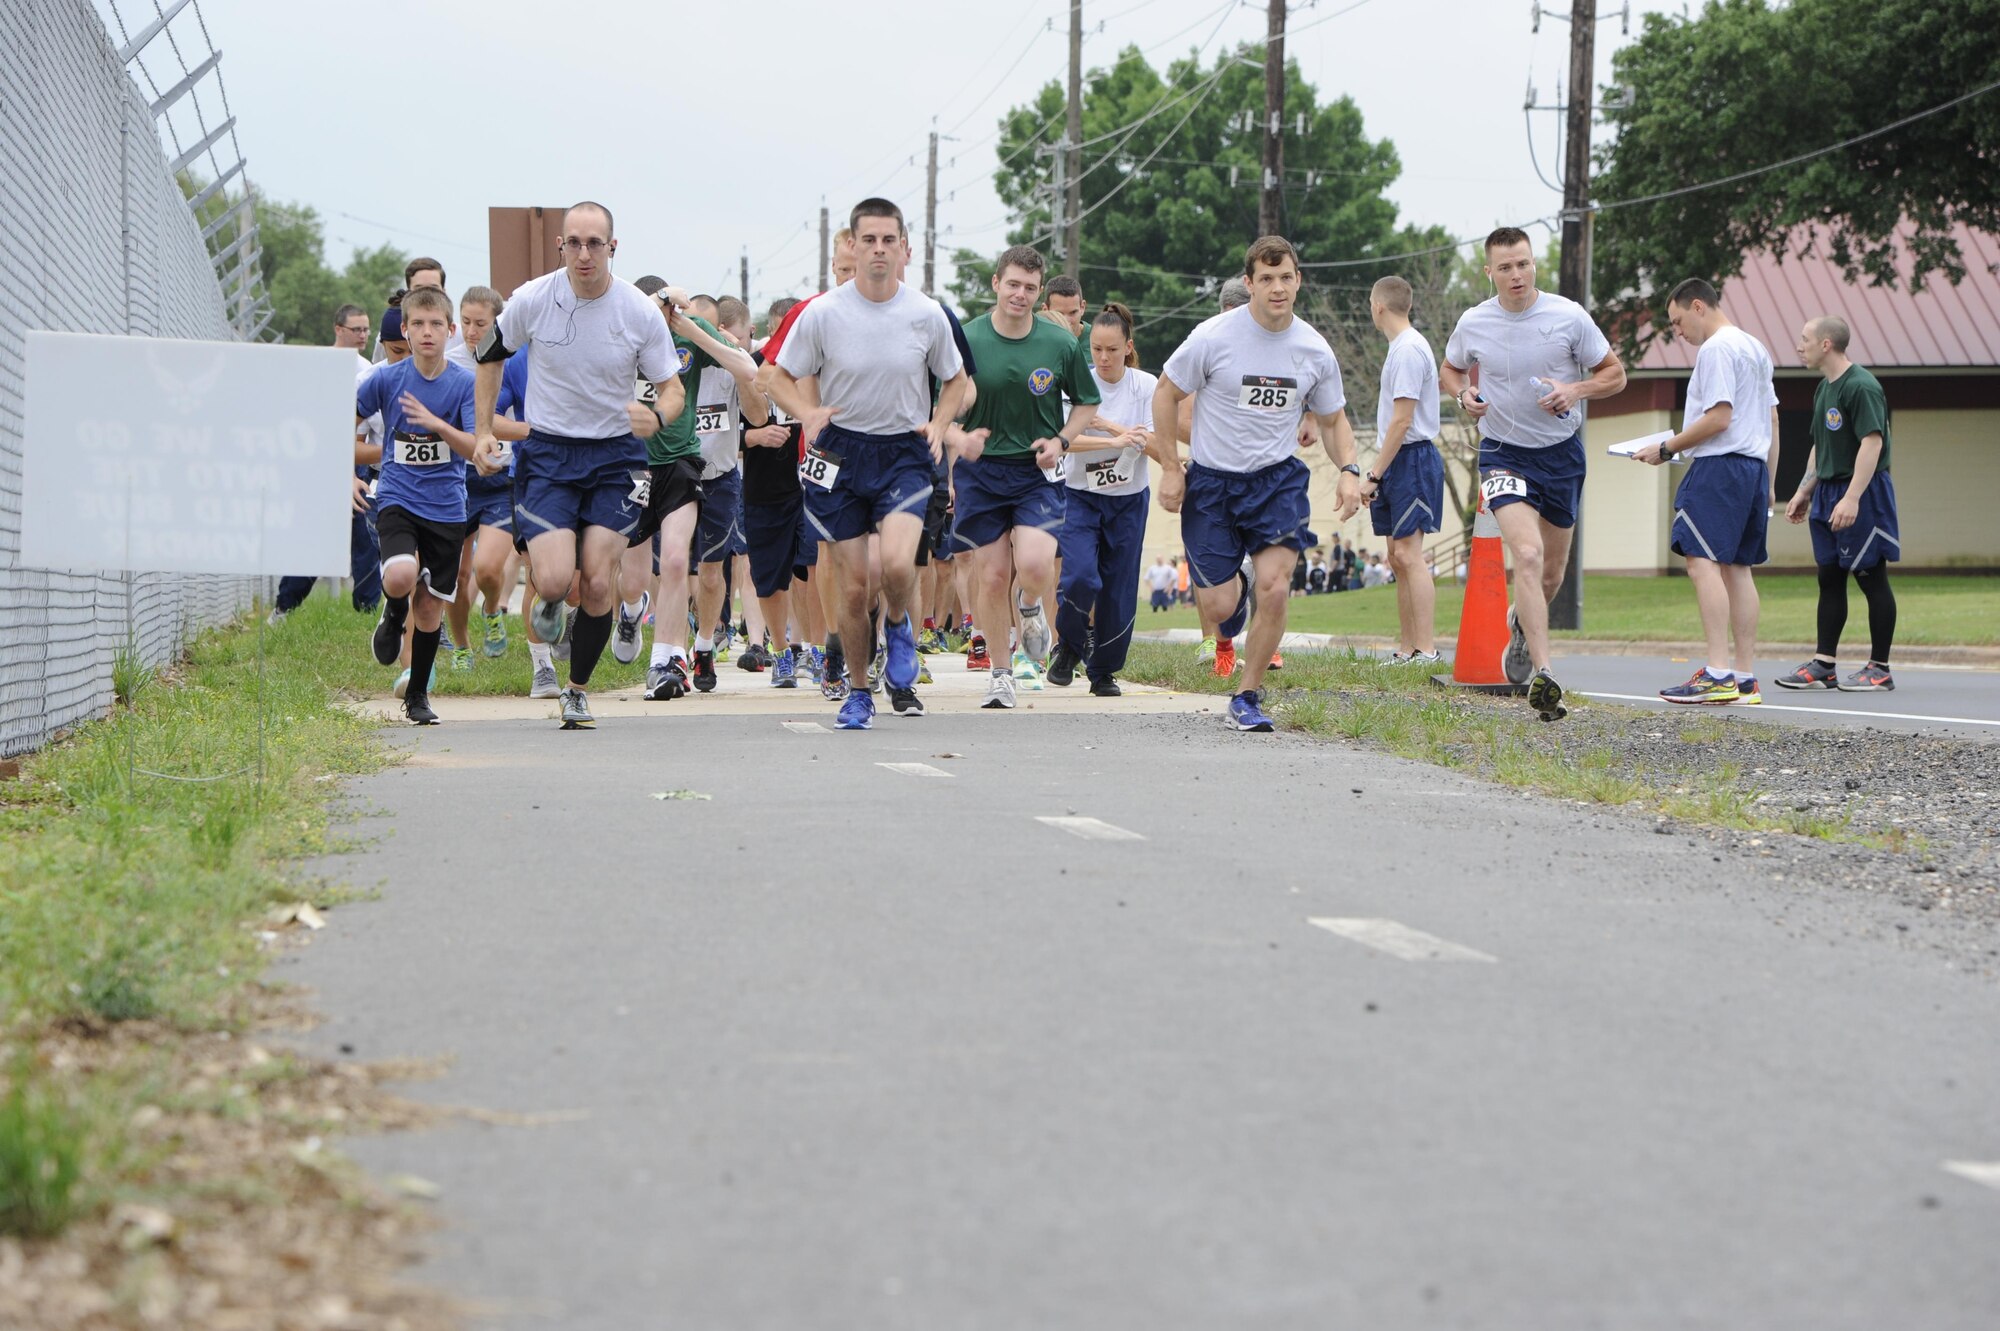 Eighth Air Force Airmen and family members participate in the Mighty Eighth Heritage 8K at Barksdale Air Force base, La., April 26, 2017. The event was held to honor and celebrate Eighth Air Force veterans, and allowed current day Airmen to interact with and hear experiences from members of the Eighth Air Force who served during times such as WWII, the Cold War, Vietnam, Operation Secret Squirrel, and Operation Linebacker II. The run served as one of the many events held in commemoration of the Eighth Air Force’s 75th anniversary. (U.S. Air Force photo by Staff Sgt. Joseph A. Pagán Jr.)